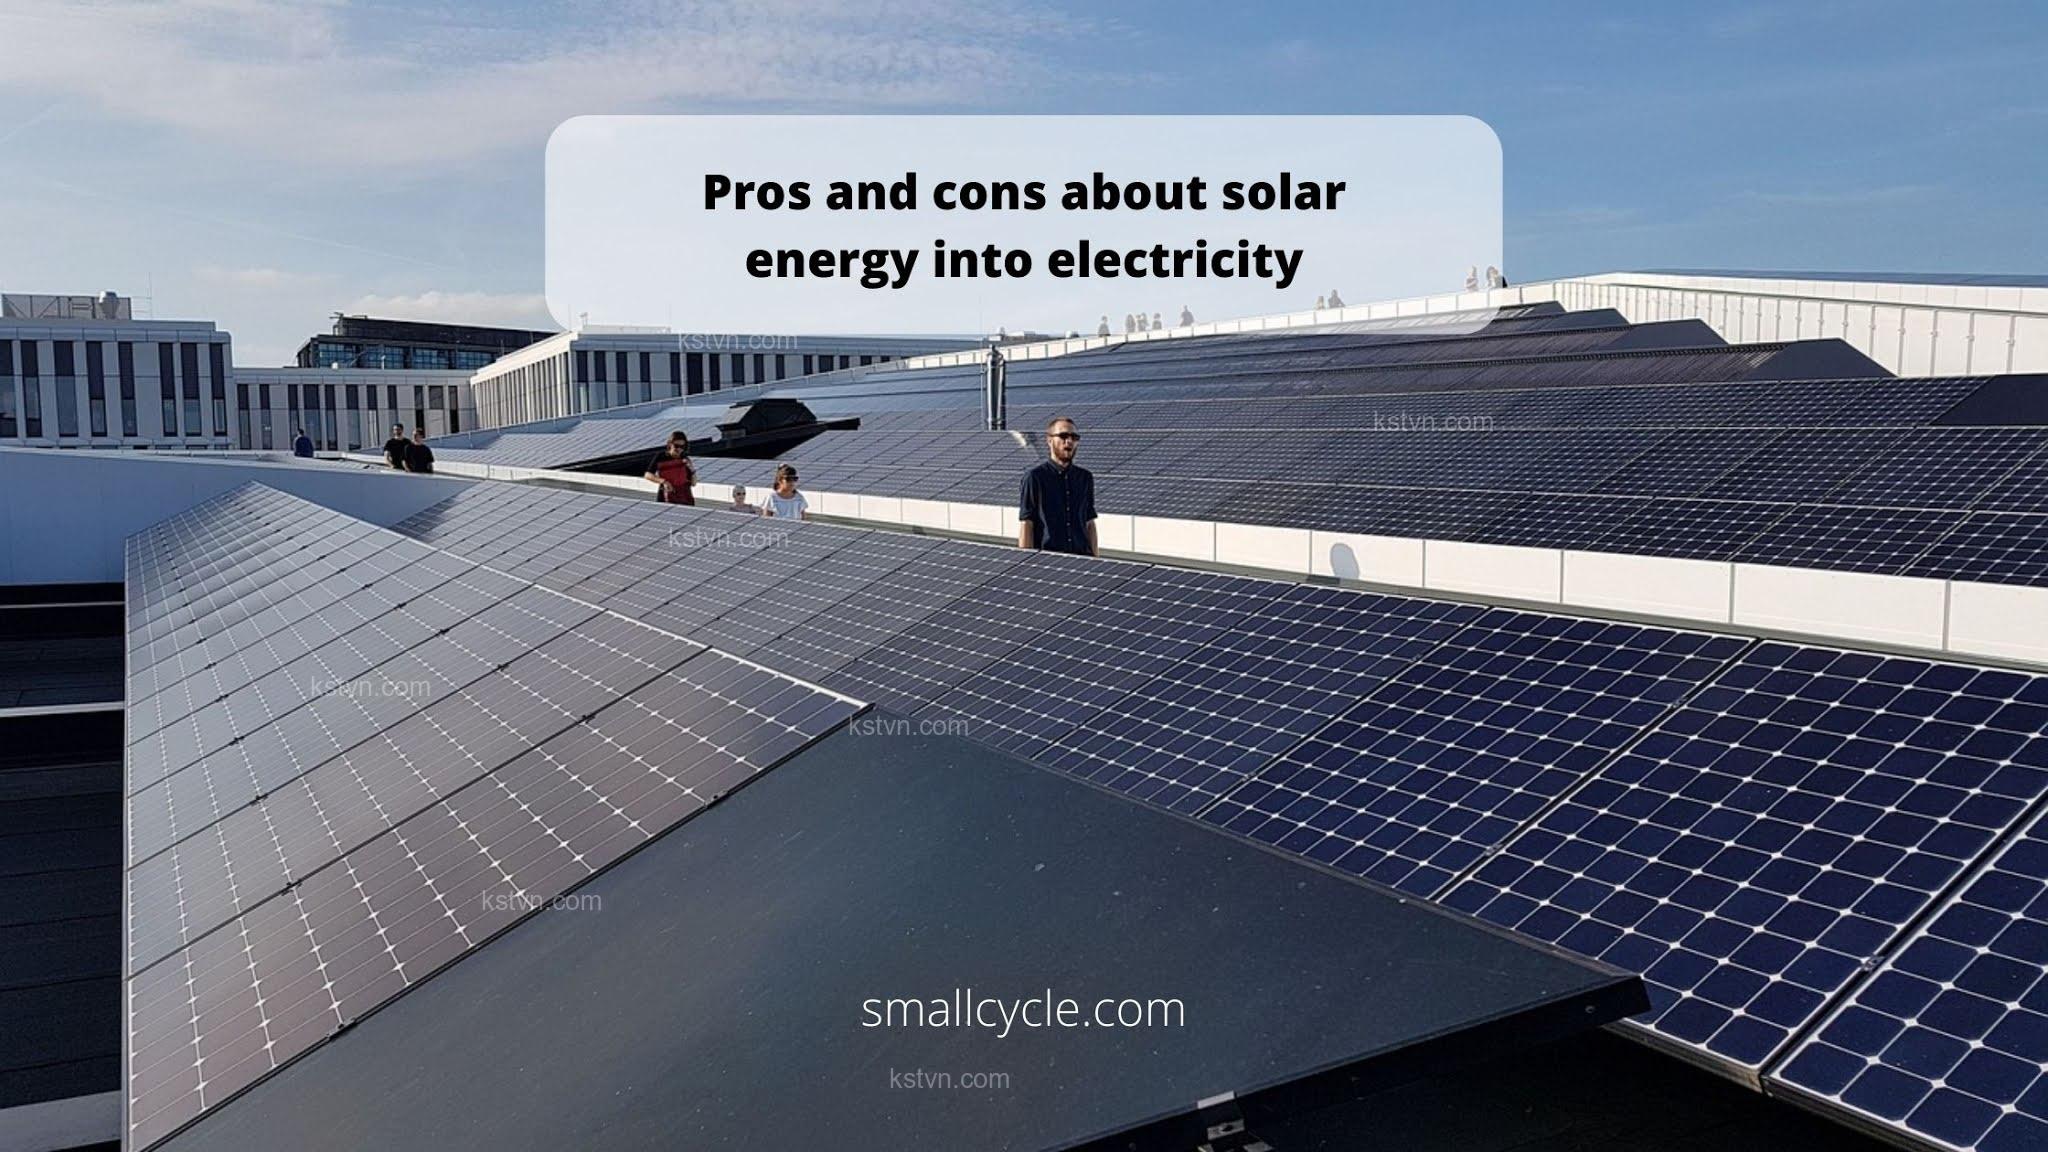 The pros and cons of investing in solar power